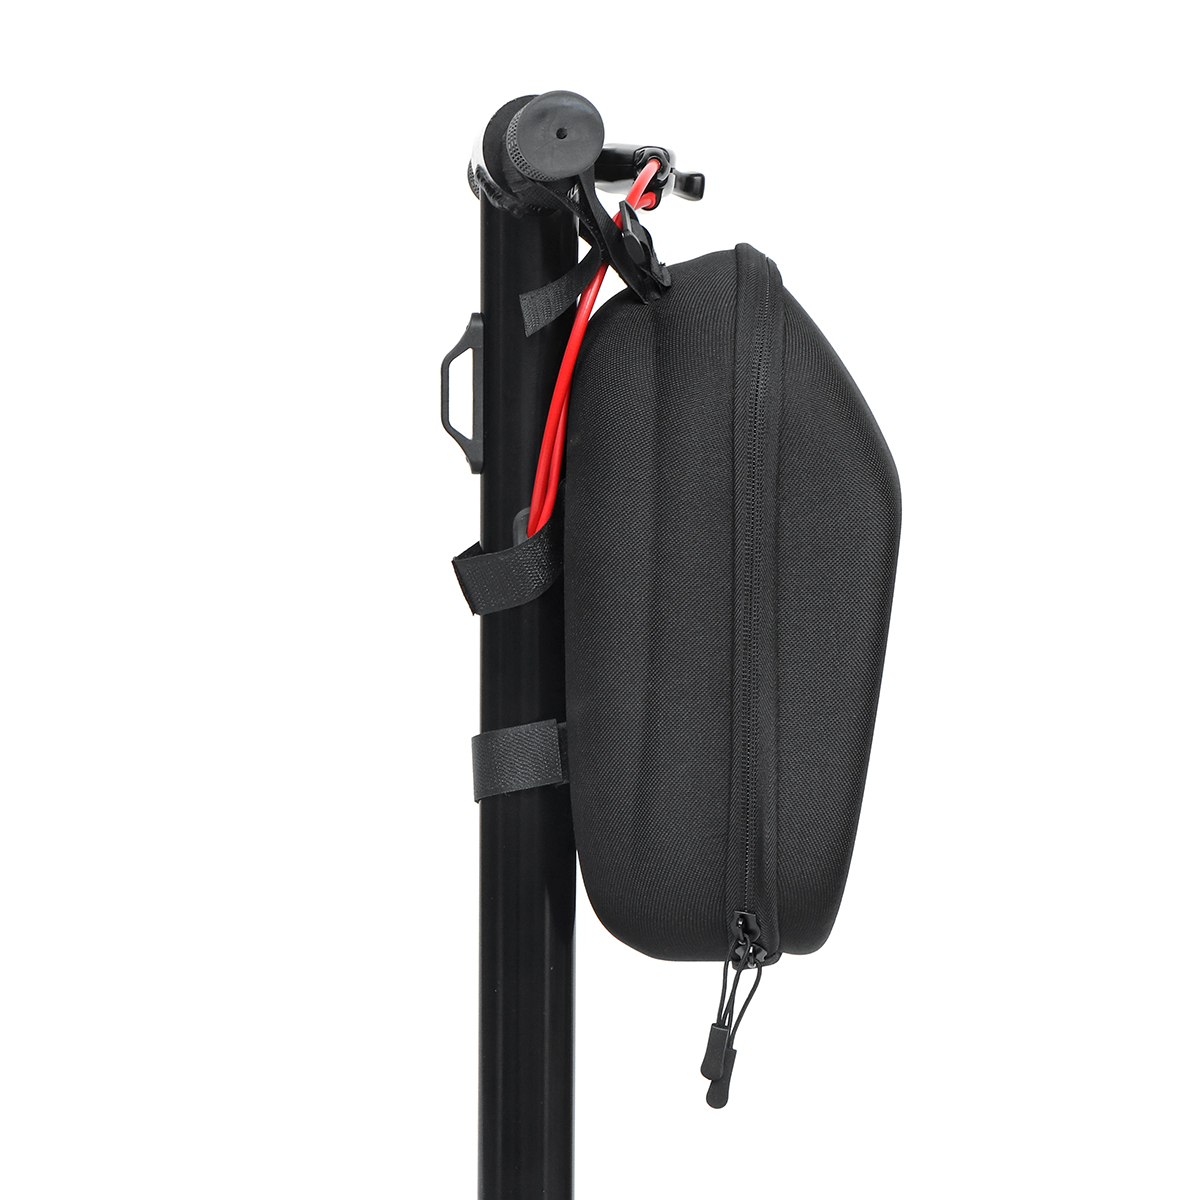 Universal-Waterproof-EVA-Storage-Bag-Front-Carrying-Bag-For-Xiaomi-M365-Electric-Scooter-1362375